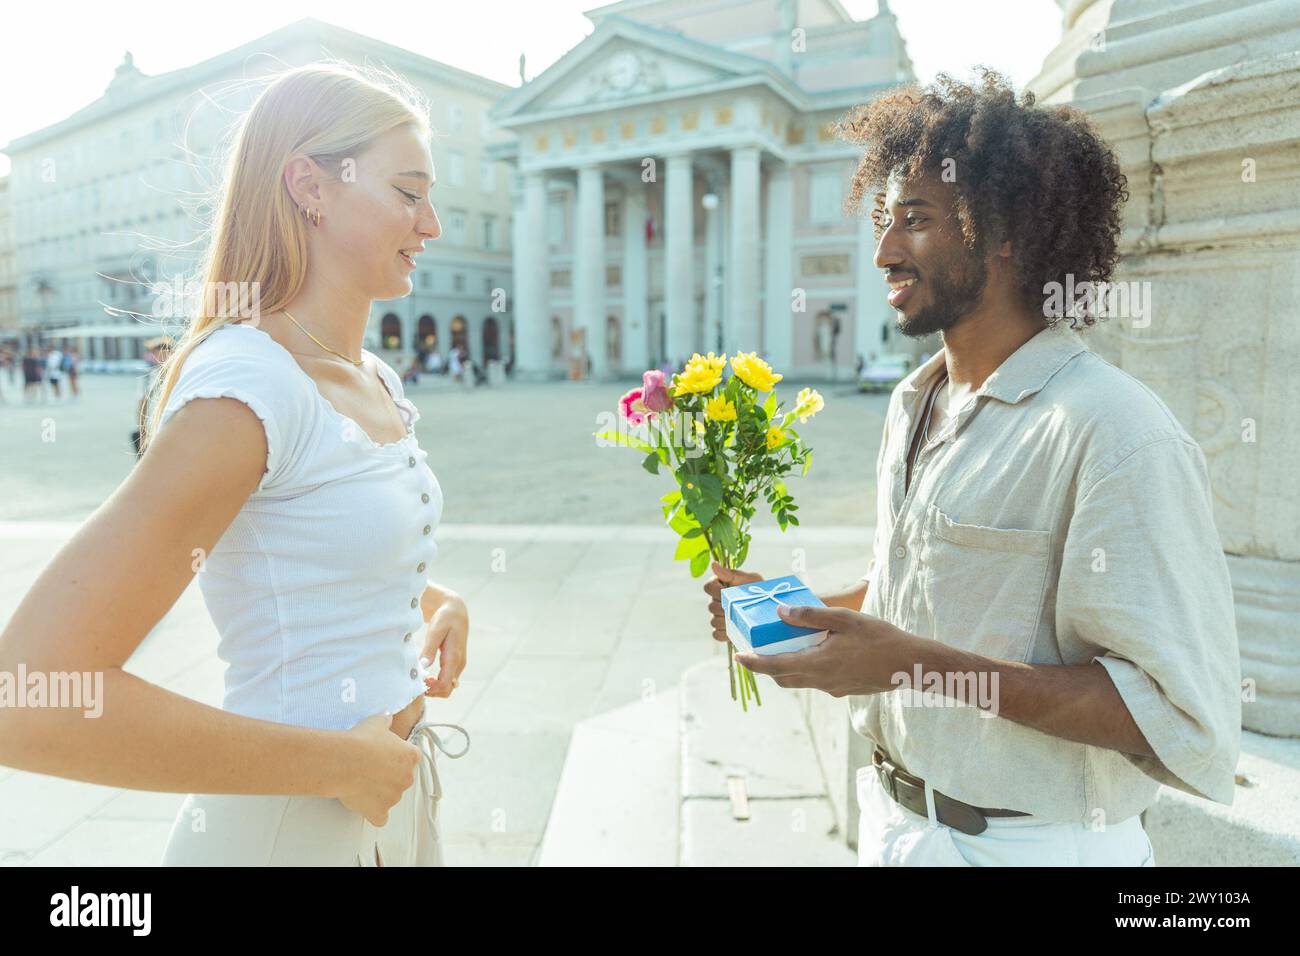 A man is about to propose to his future wife with flowers and a ring. Stock Photo